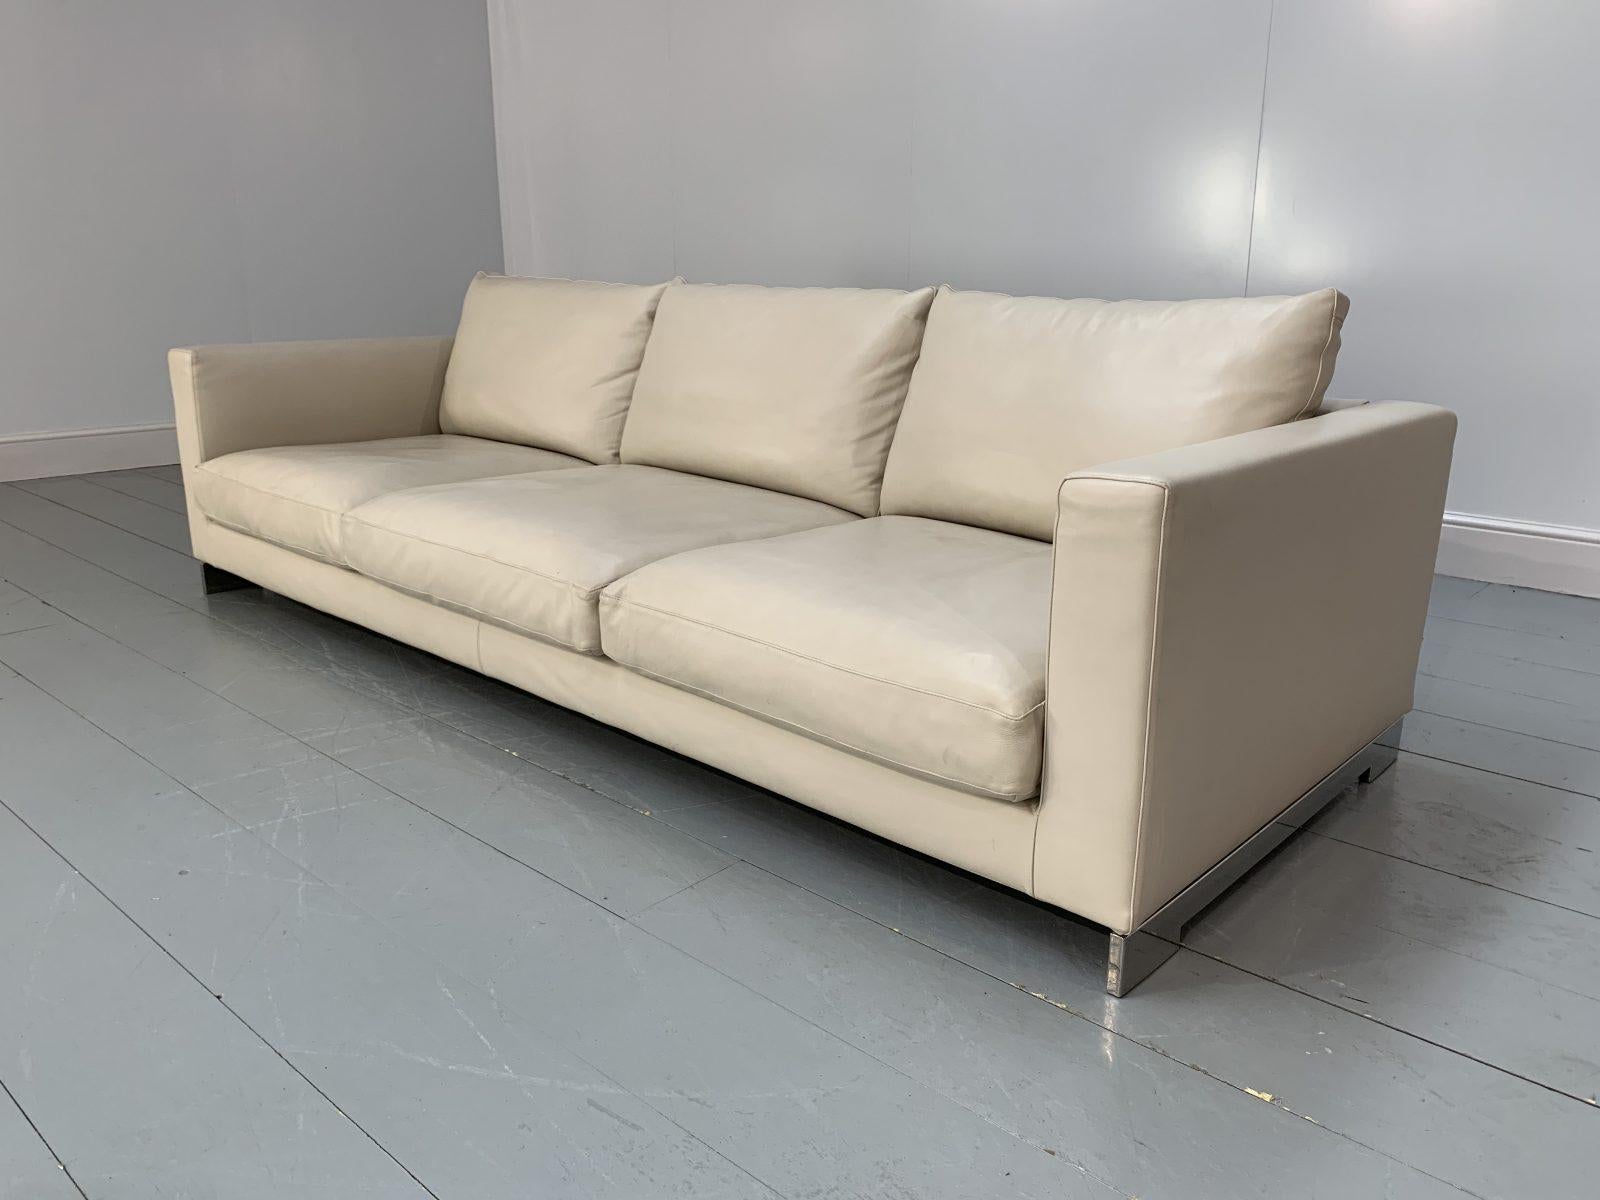 This is a superb, immaculate Molteni & C “Reversi D260A” 3-Seat Sofa, dressed in a peerless top-grade Leather in a flexible, neutral Ivory.
 
In a world of temporary pleasures, Molteni create beautiful furniture that remains a joy forever.

This